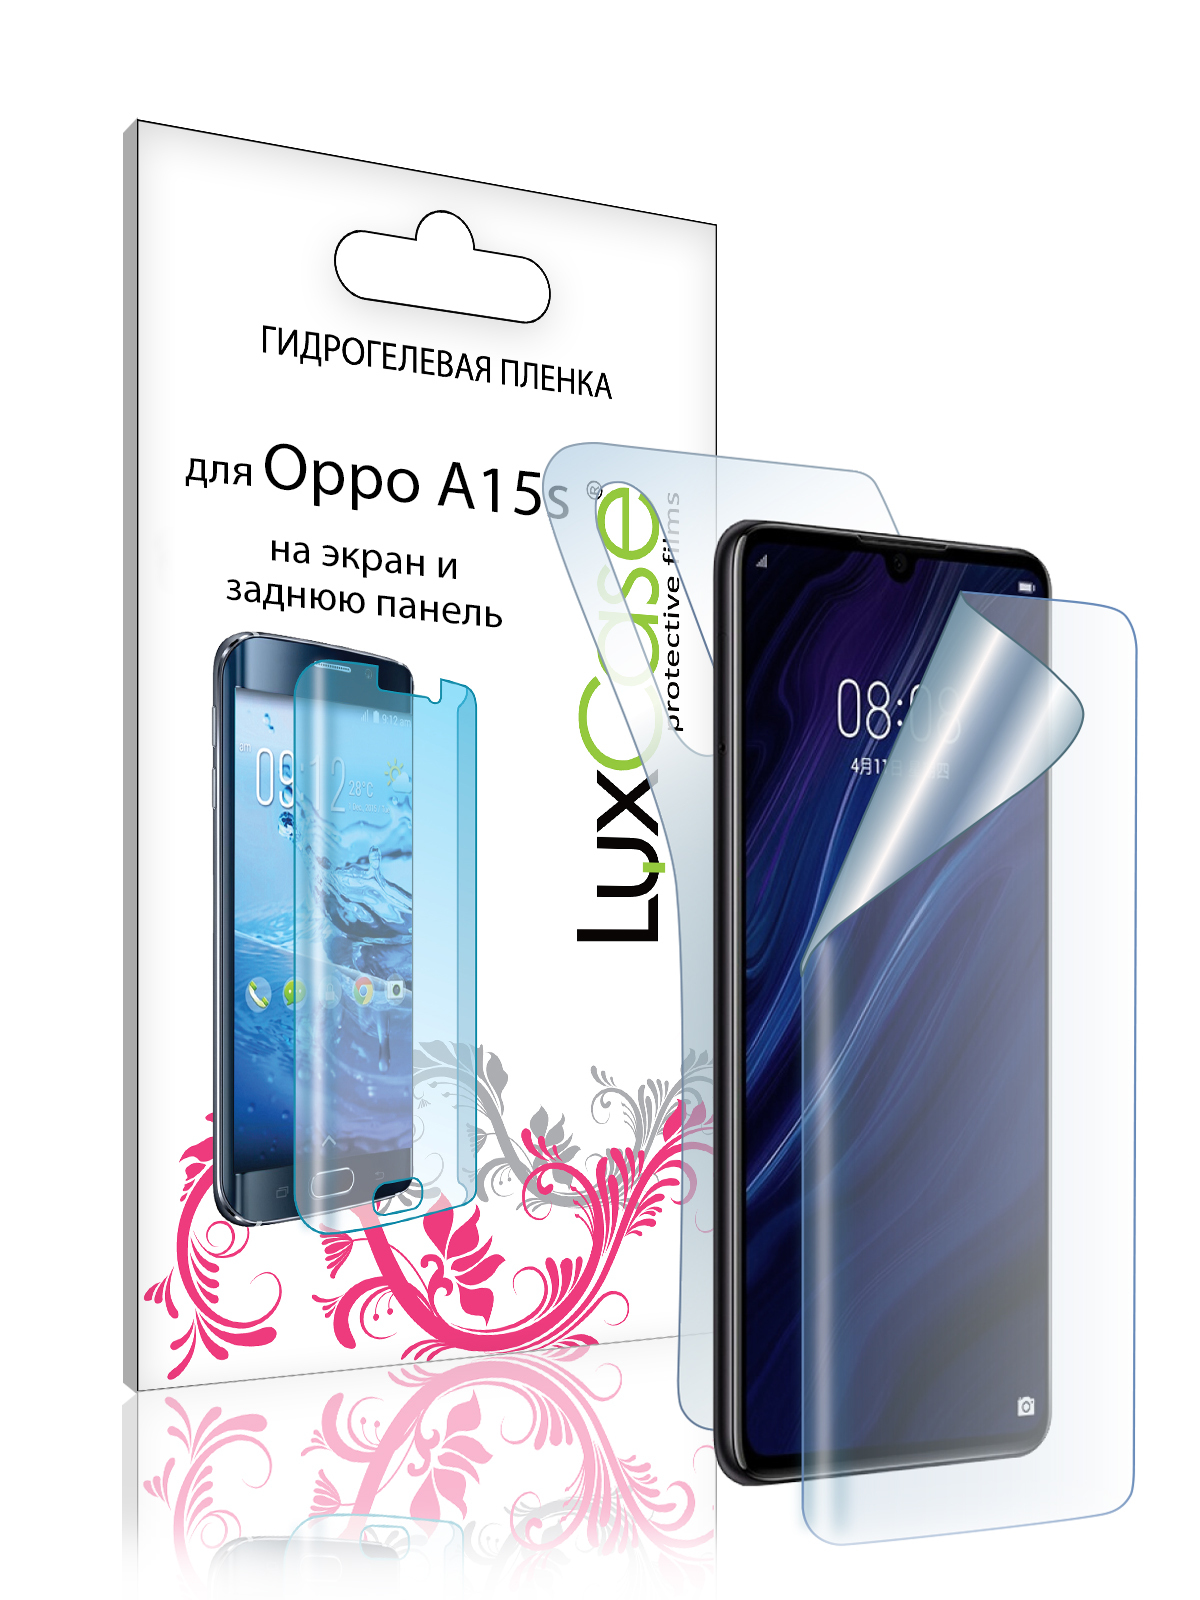 Пленка гидрогелевая LuxCase для Oppo A15S 0.14mm Front and Back Transparent 86553 гидрогелевая пленка luxcase для oppo a3s 0 14mm front and back transparent 86976